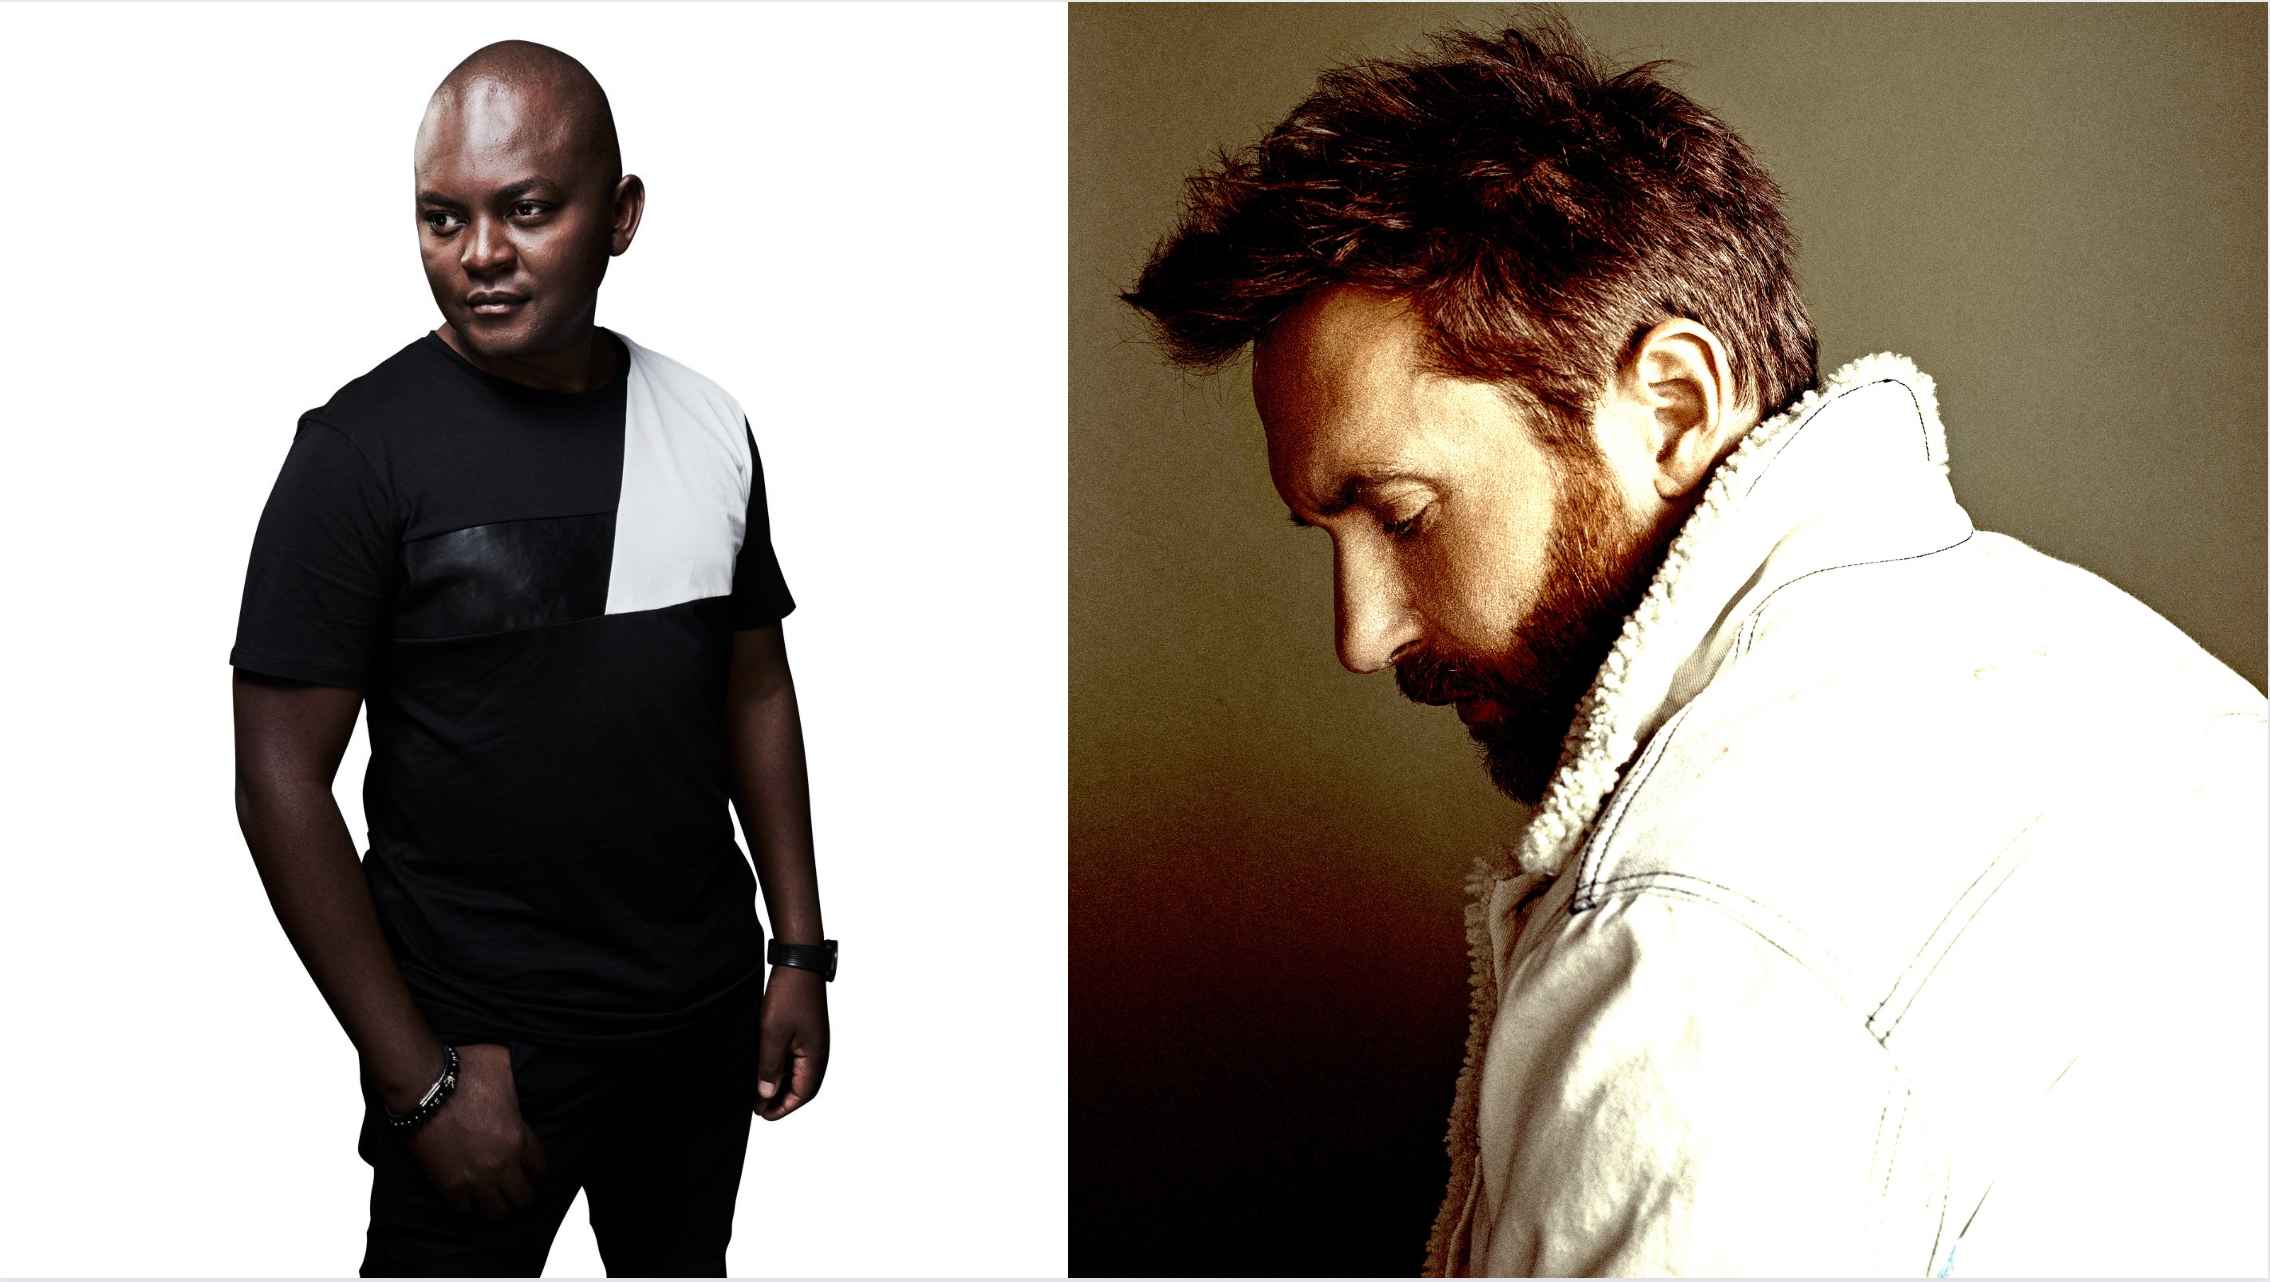 Jack Back and THEMBA deliver new single as part of Defected Records’ 25th Anniversary